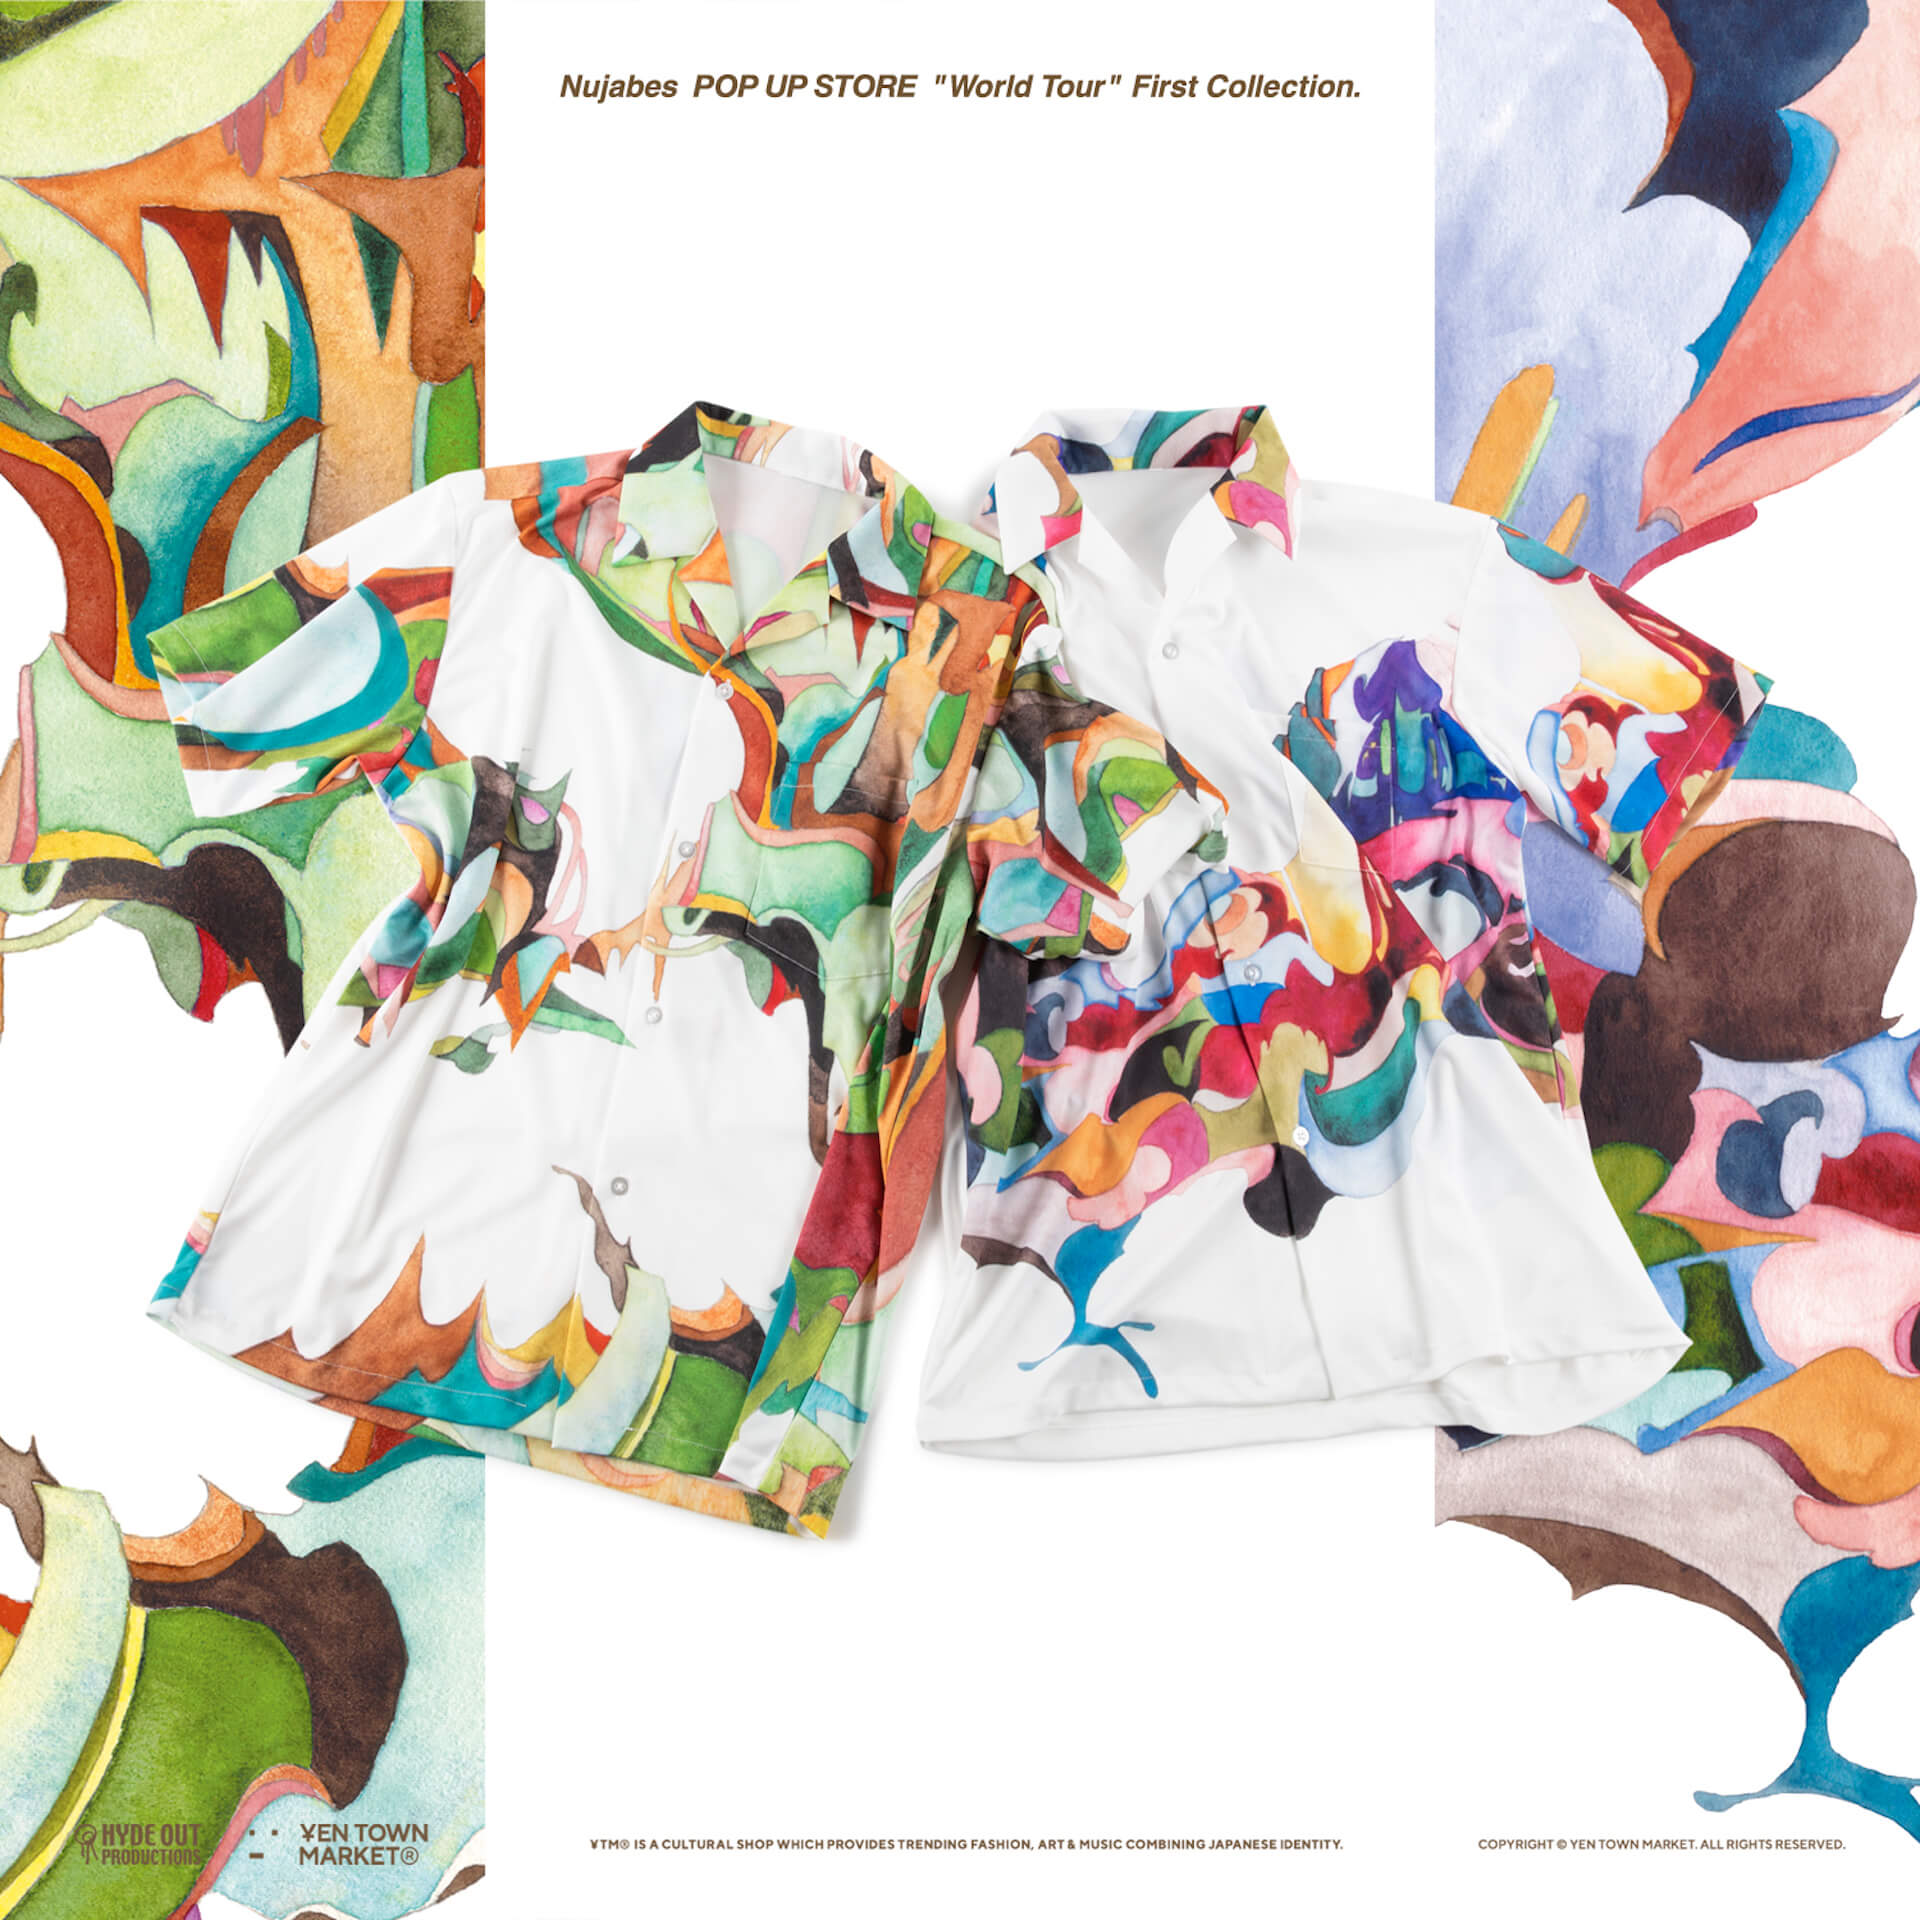 Nujabesのオフィシャルポップアップ＜Nujabes Official Pop Up First Collection＞もクライマックスに突入！最新作「Drop 5」の受注が本日より開始 life210521_nujabes-210521_2